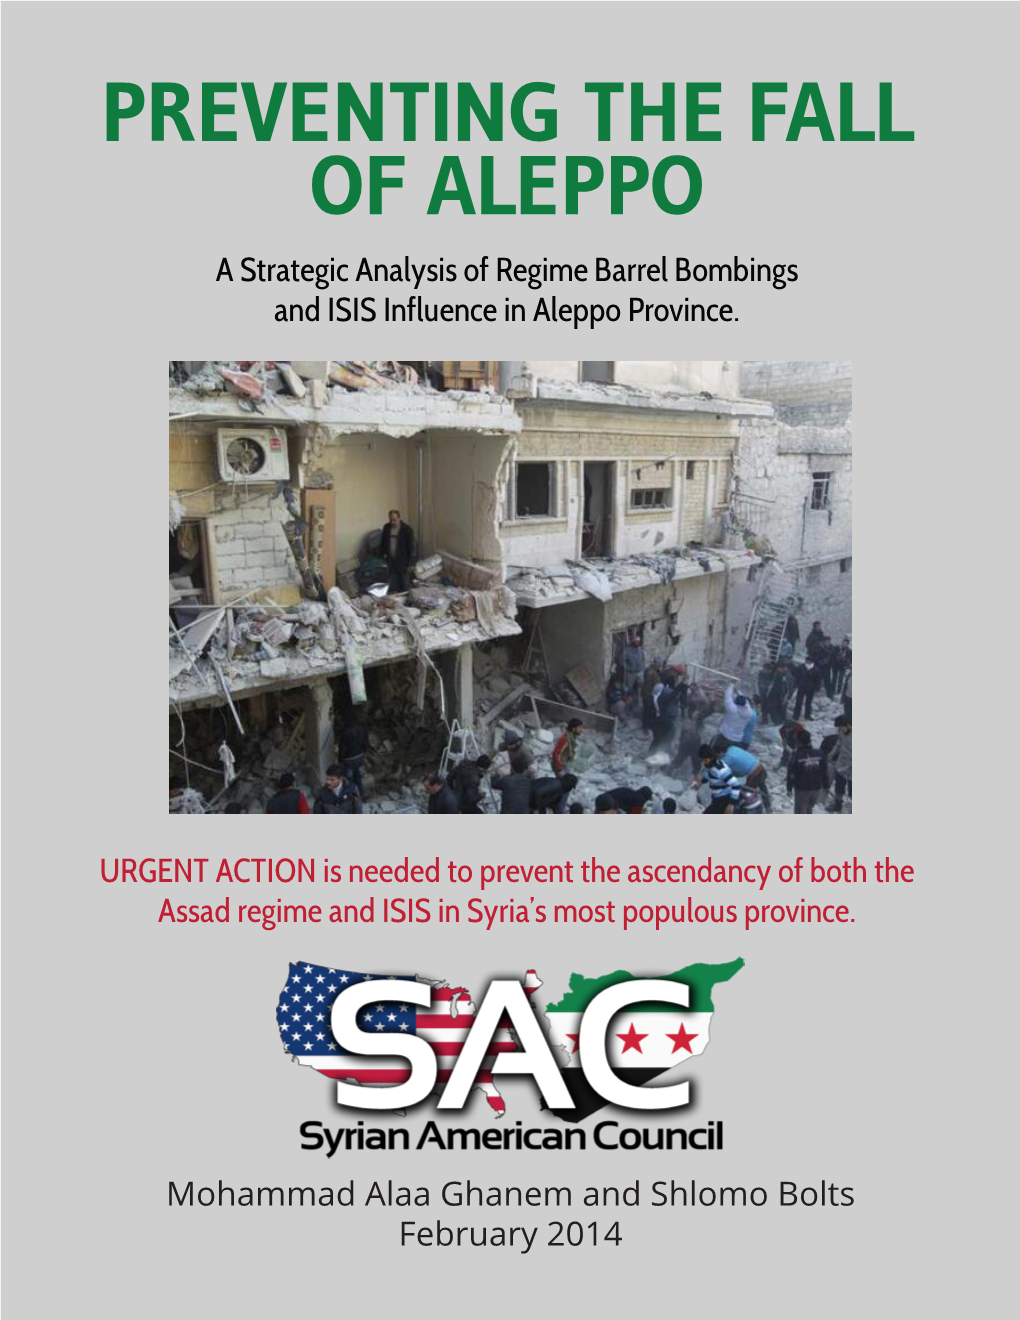 PREVENTING the FALL of ALEPPO a Strategic Analysis of Regime Barrel Bombings and ISIS Influence in Aleppo Province